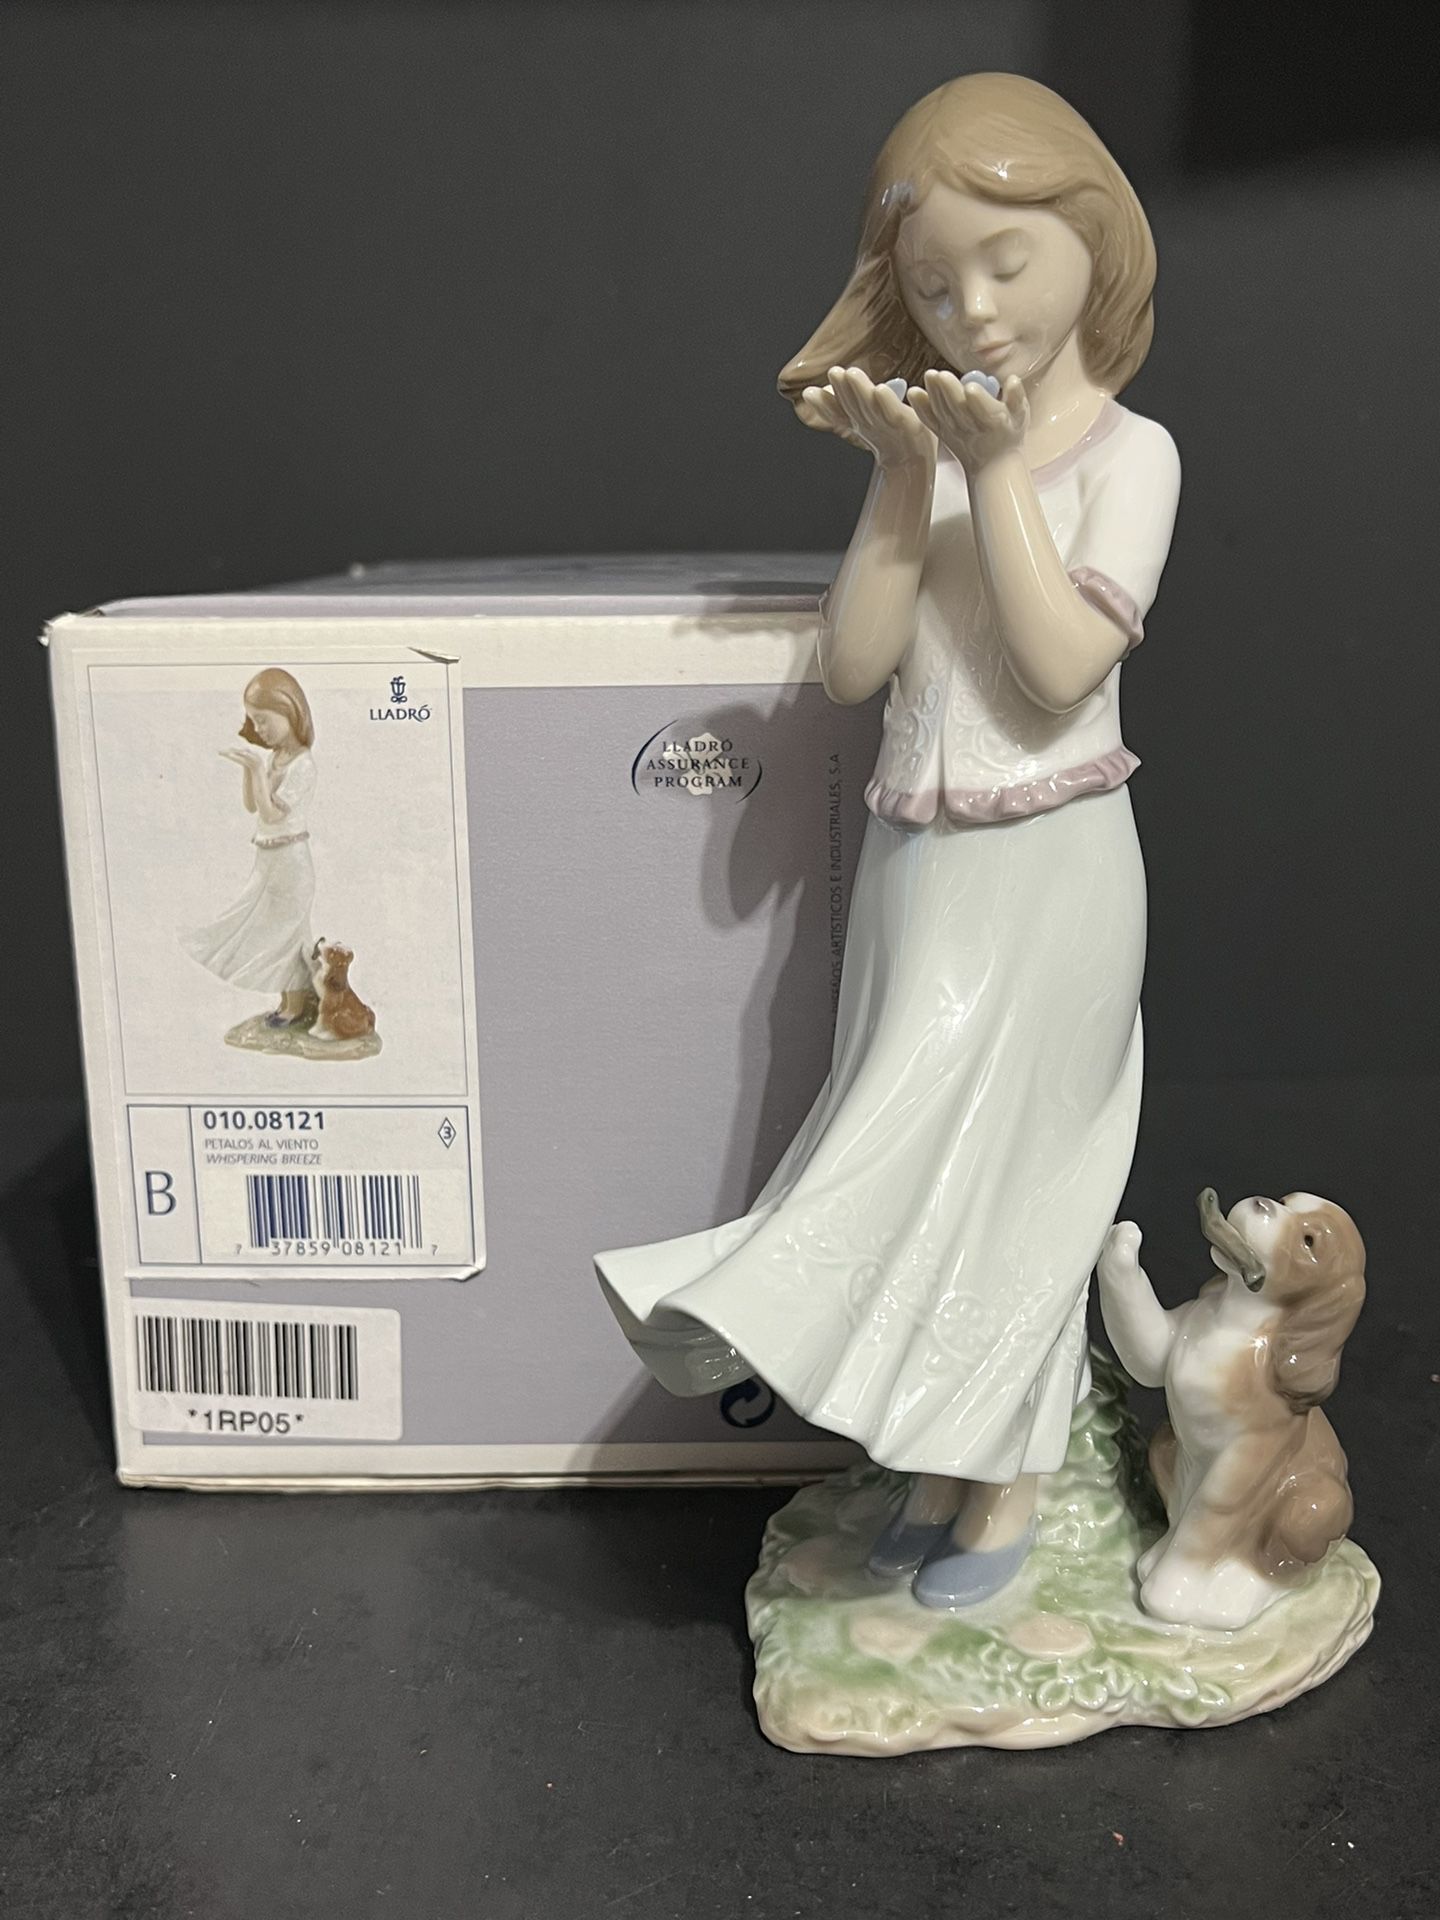 Retired Lladro Porcelain Figurine “Whispering Breeze” #8121 With Box